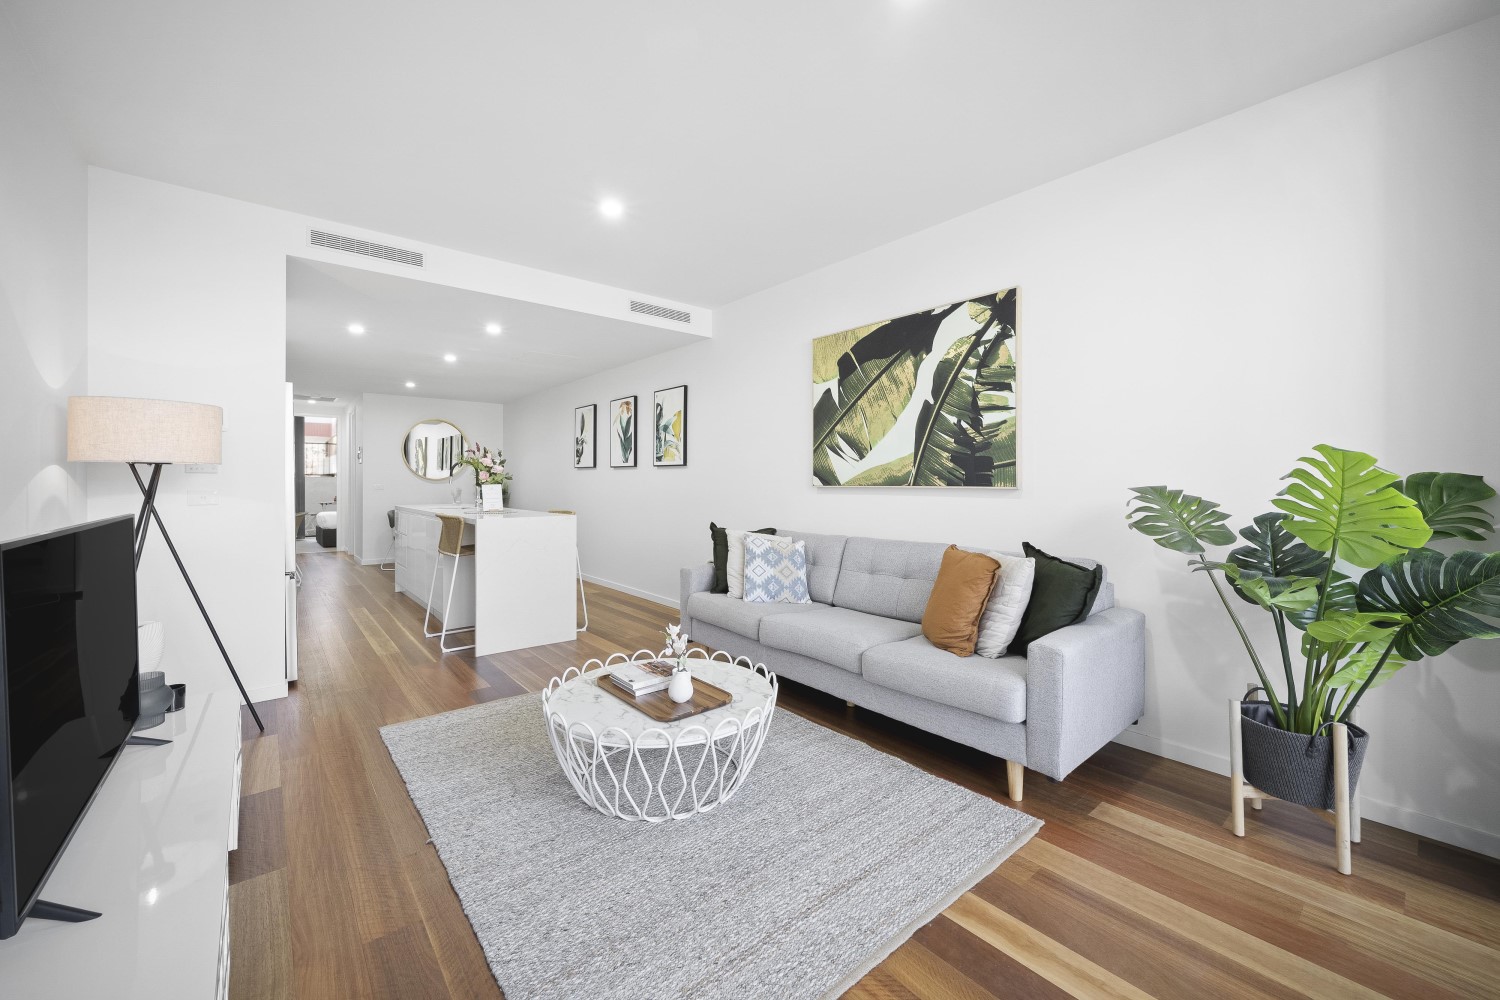 Living Room - One Bedroom Apartment - Founders Lane Apartments - Canberra - Urban Rest